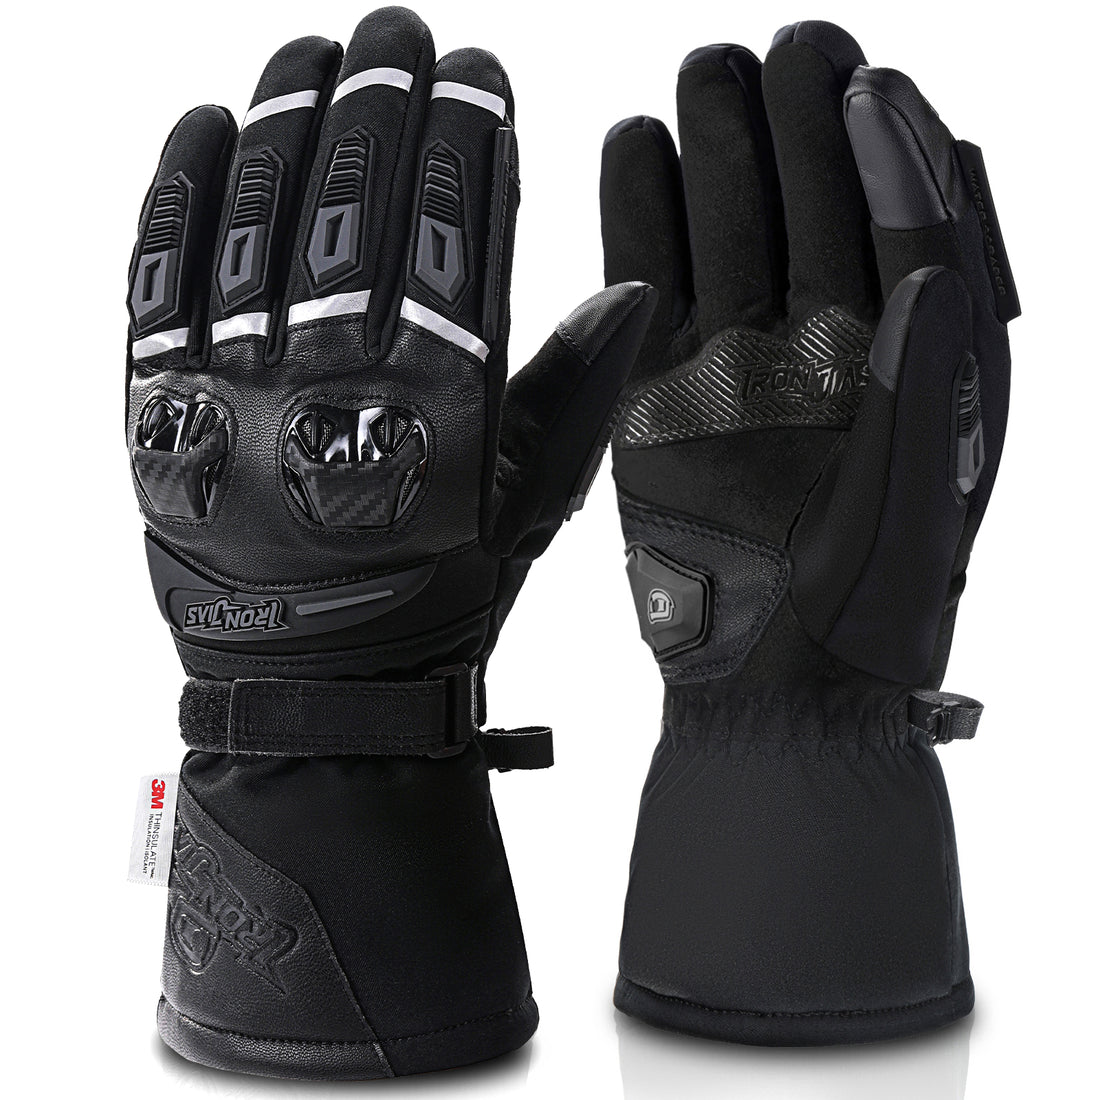 IRONJIAS Winter Warm Black Waterproof Protective Motorcycle Riding Gloves